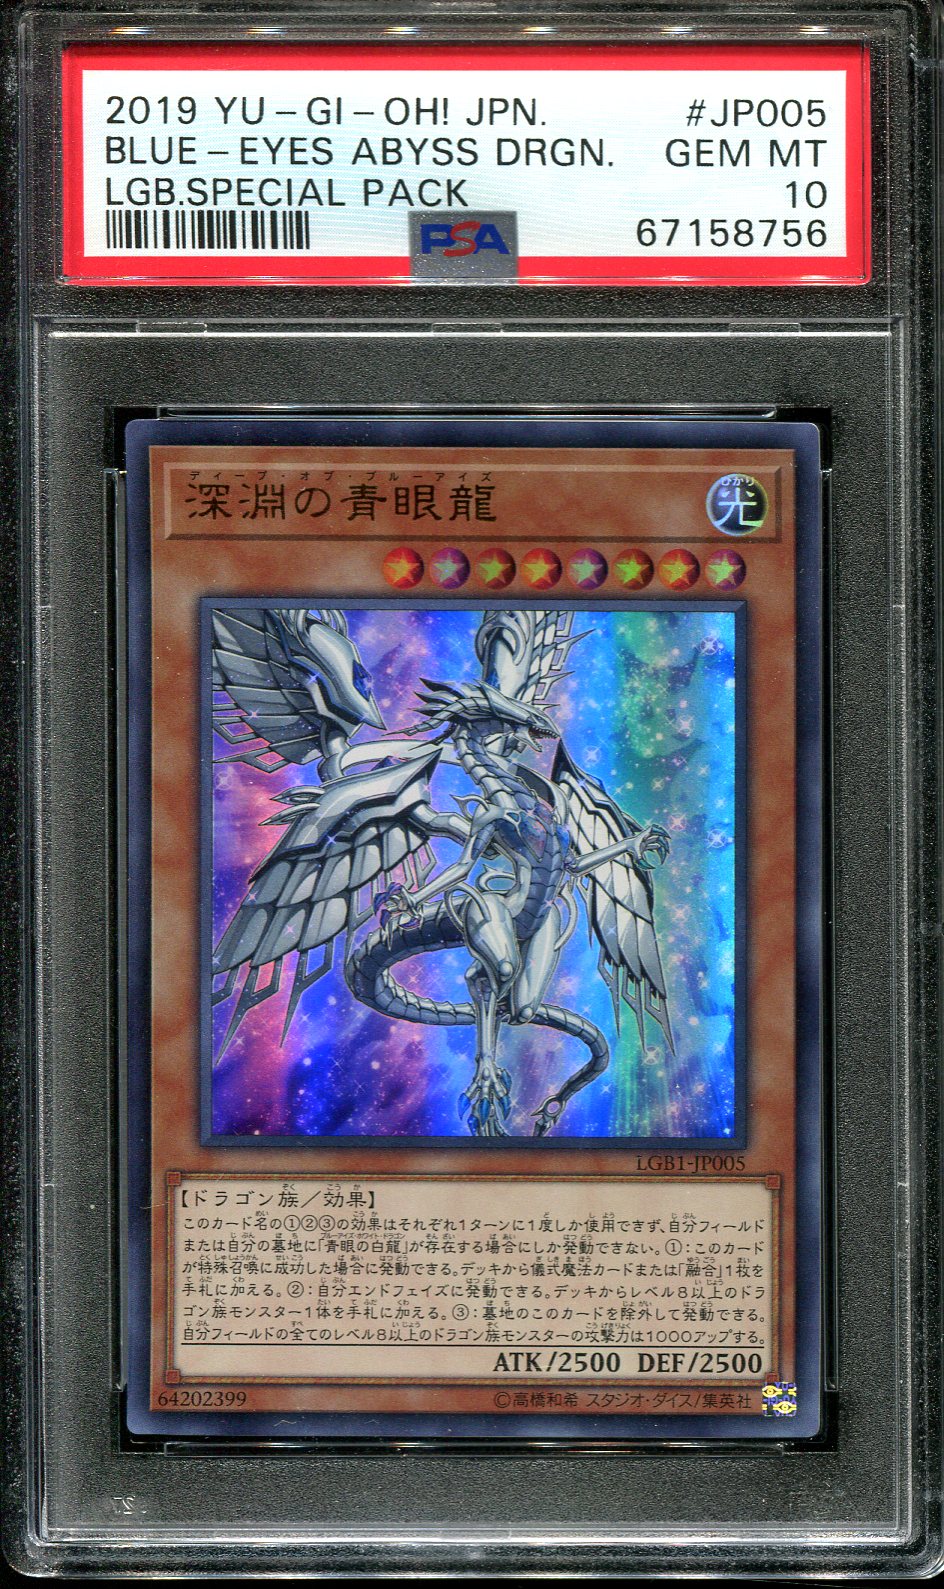 YUGIOH - PSA 10 - BLUE EYES ABYSS DRAGON - JP005 - JAPANESE LGB SPECIAL PACK